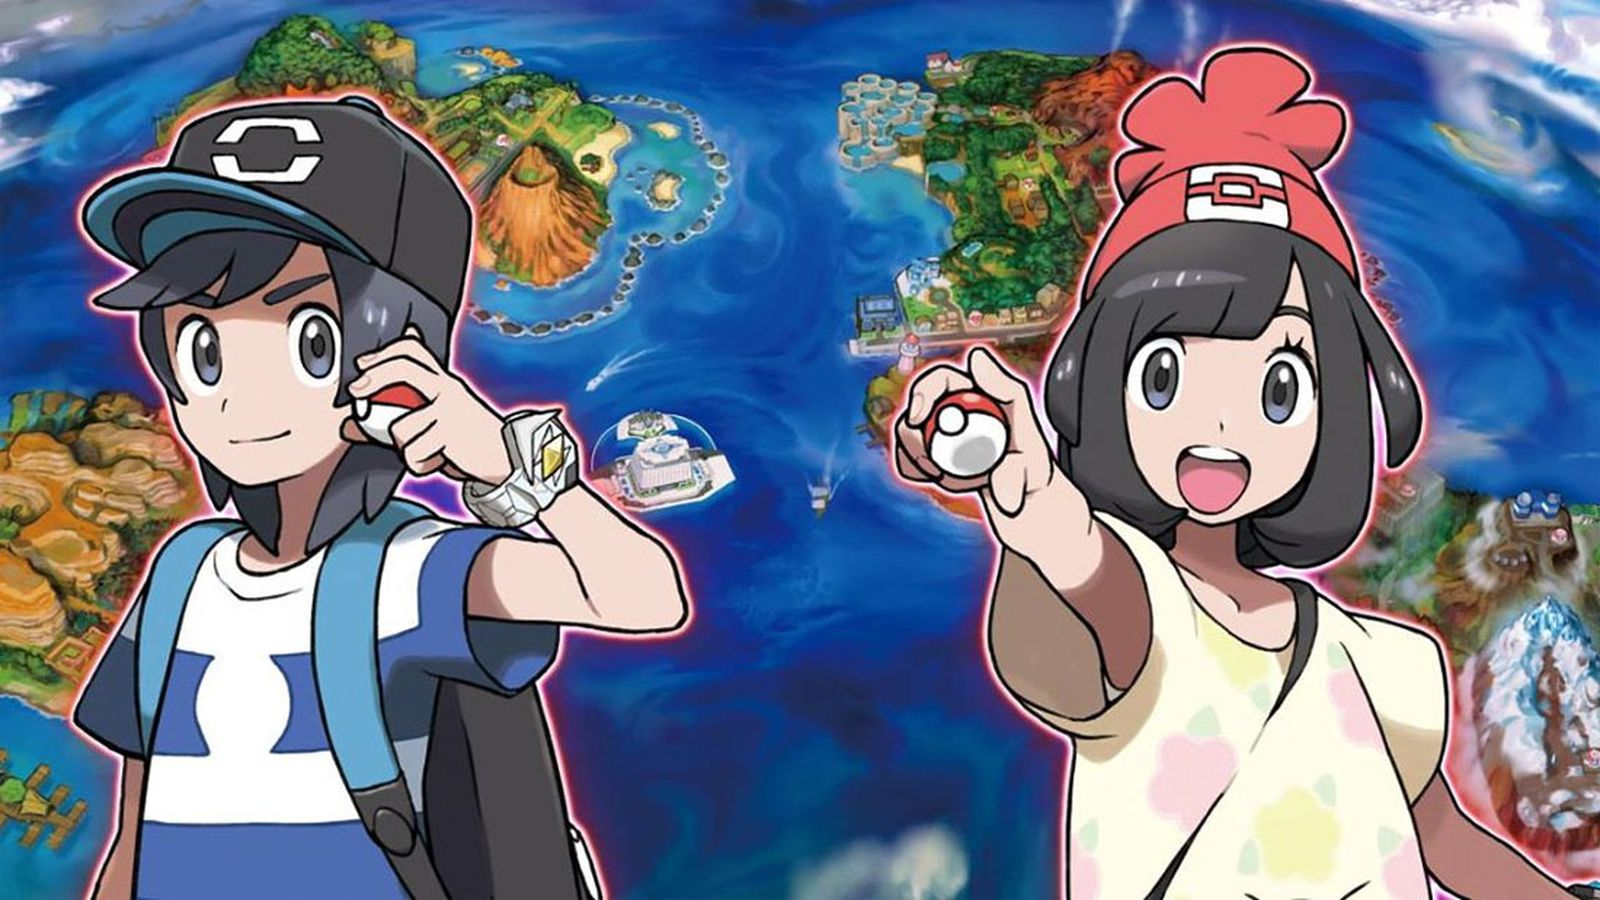 Gallery: Take a Closer Look at the Pokémon Sun and Moon Legendary